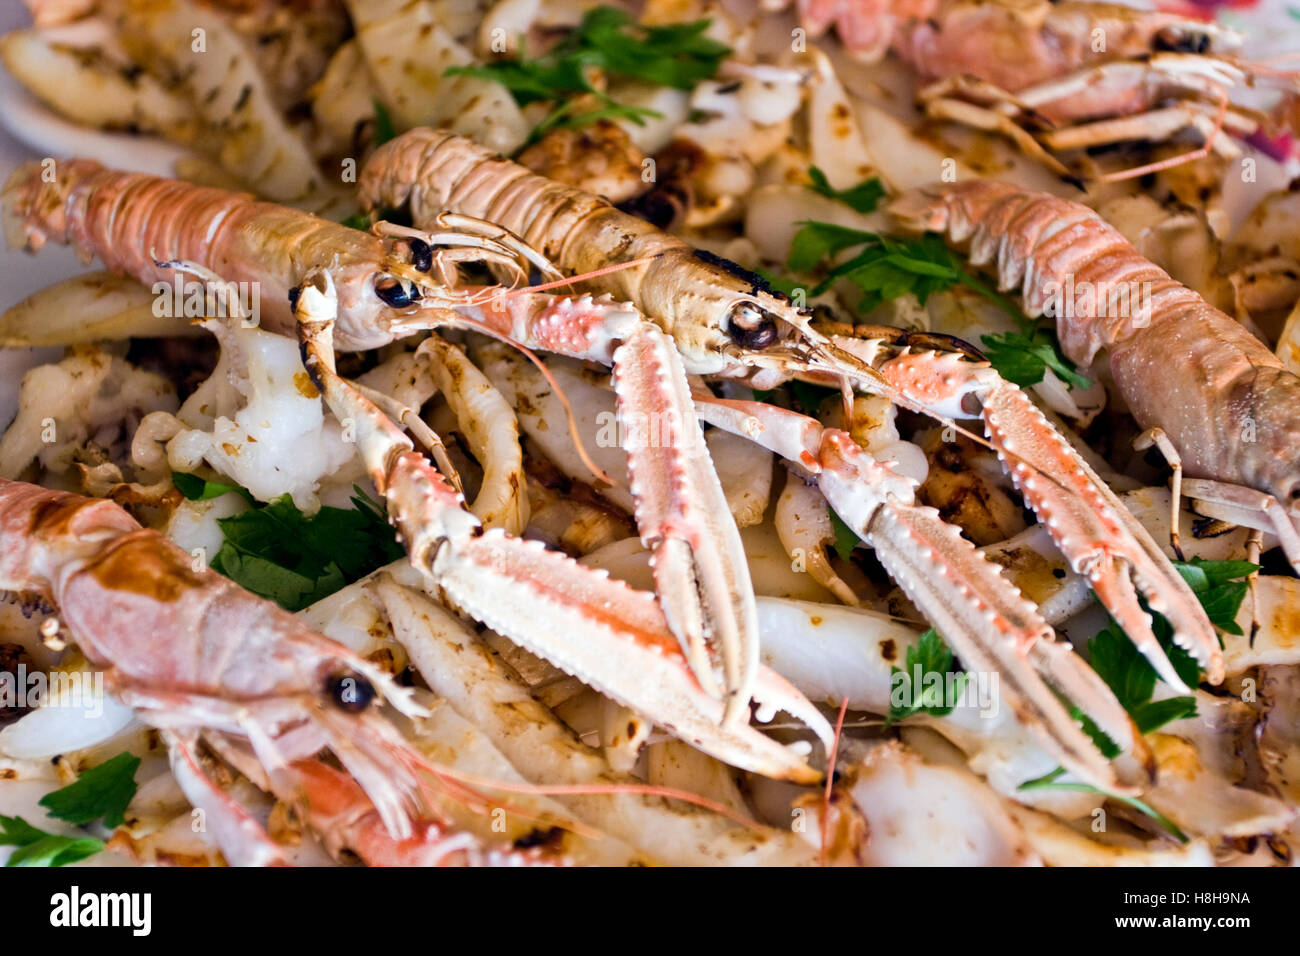 Char-grilled shrimp and cuttle fish salad Stock Photo